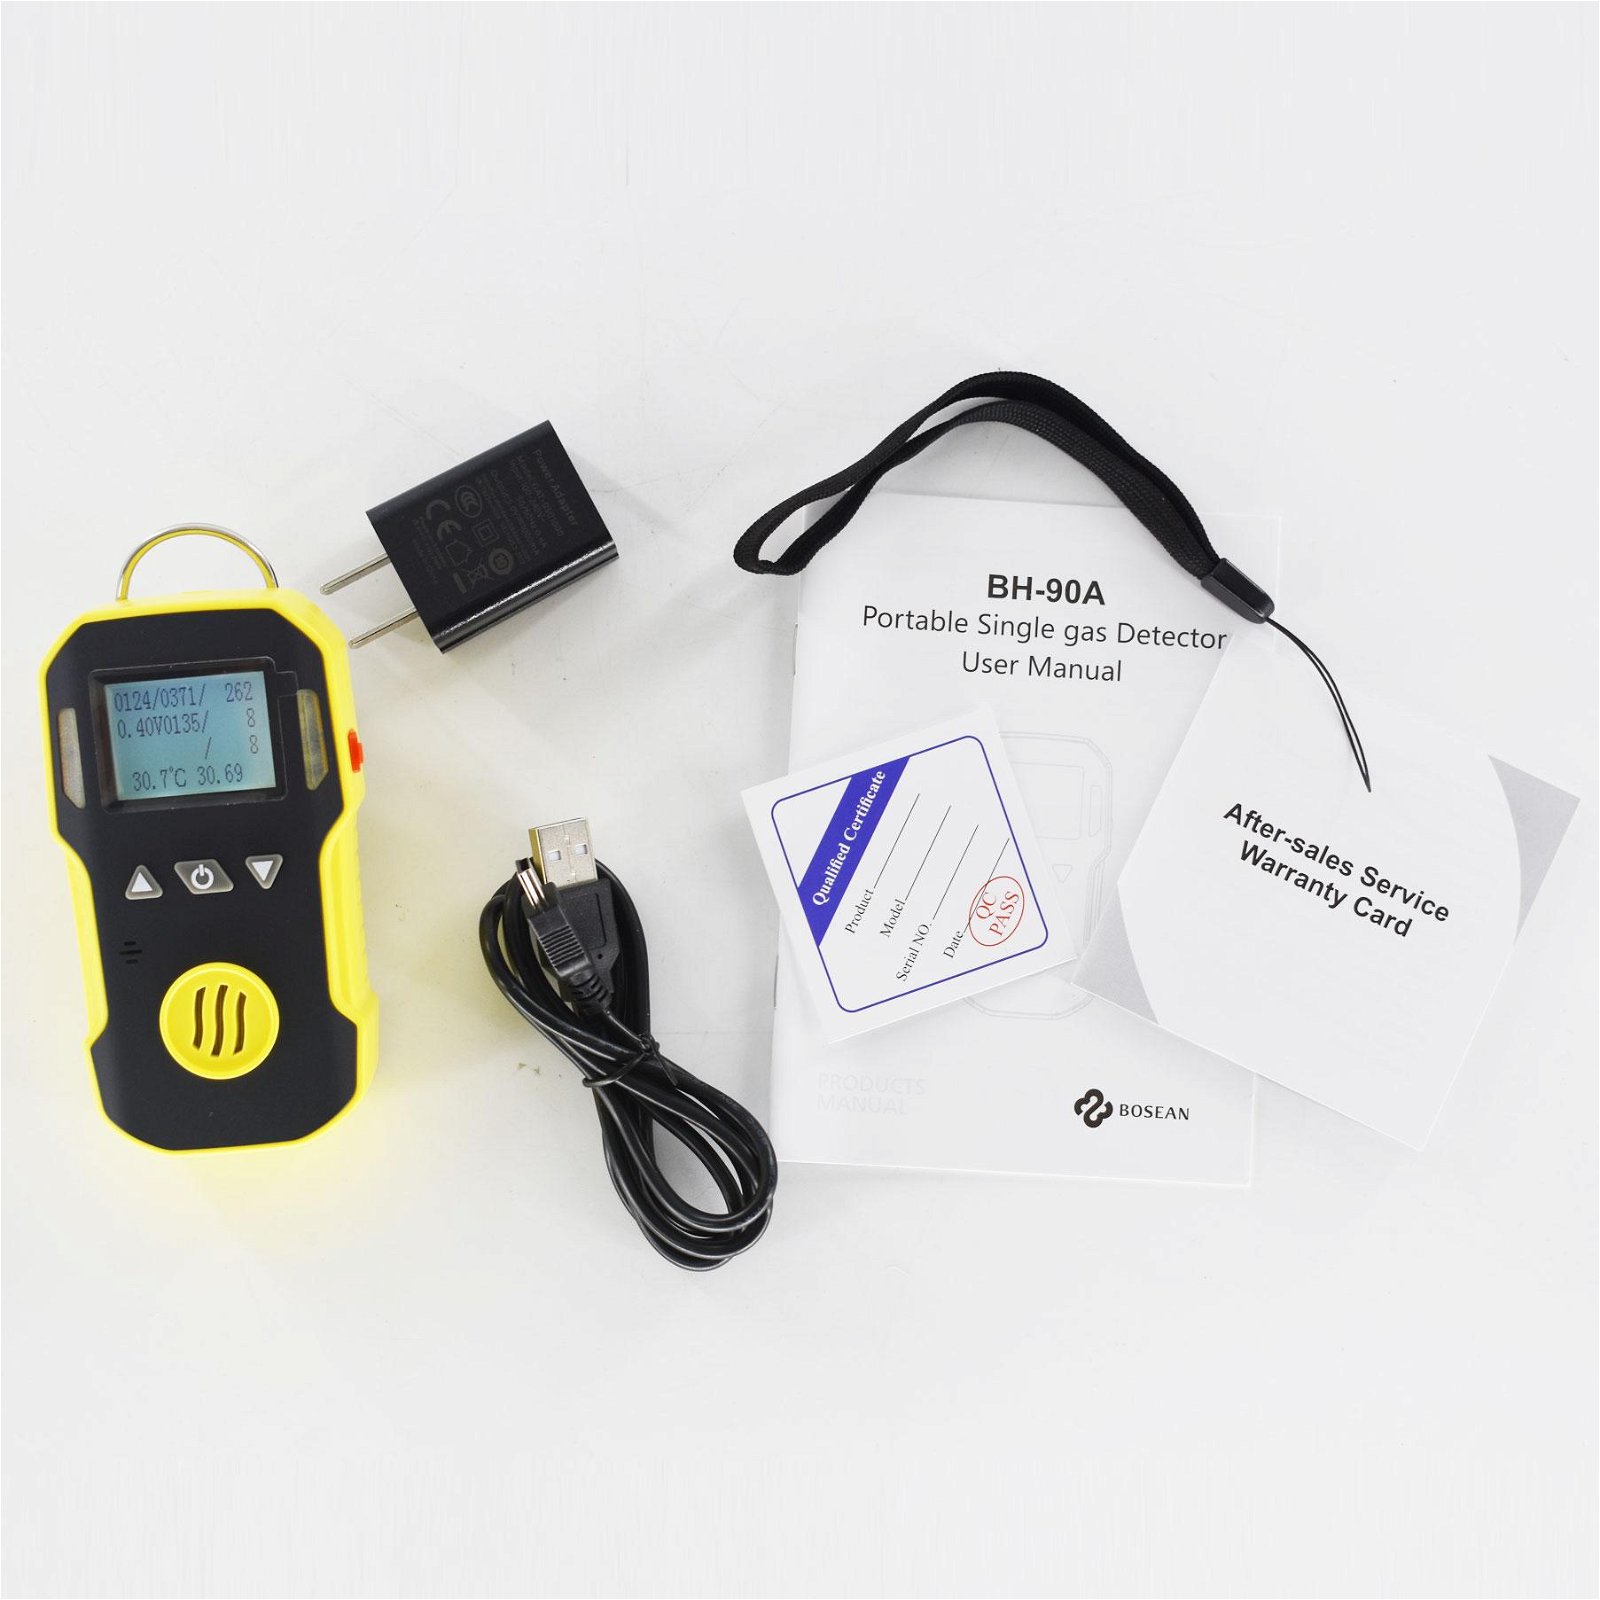 Hydrogen Sulfide Gas Detector BH-90A H2S Leak Detector 0-50ppm Explosion-proof 7